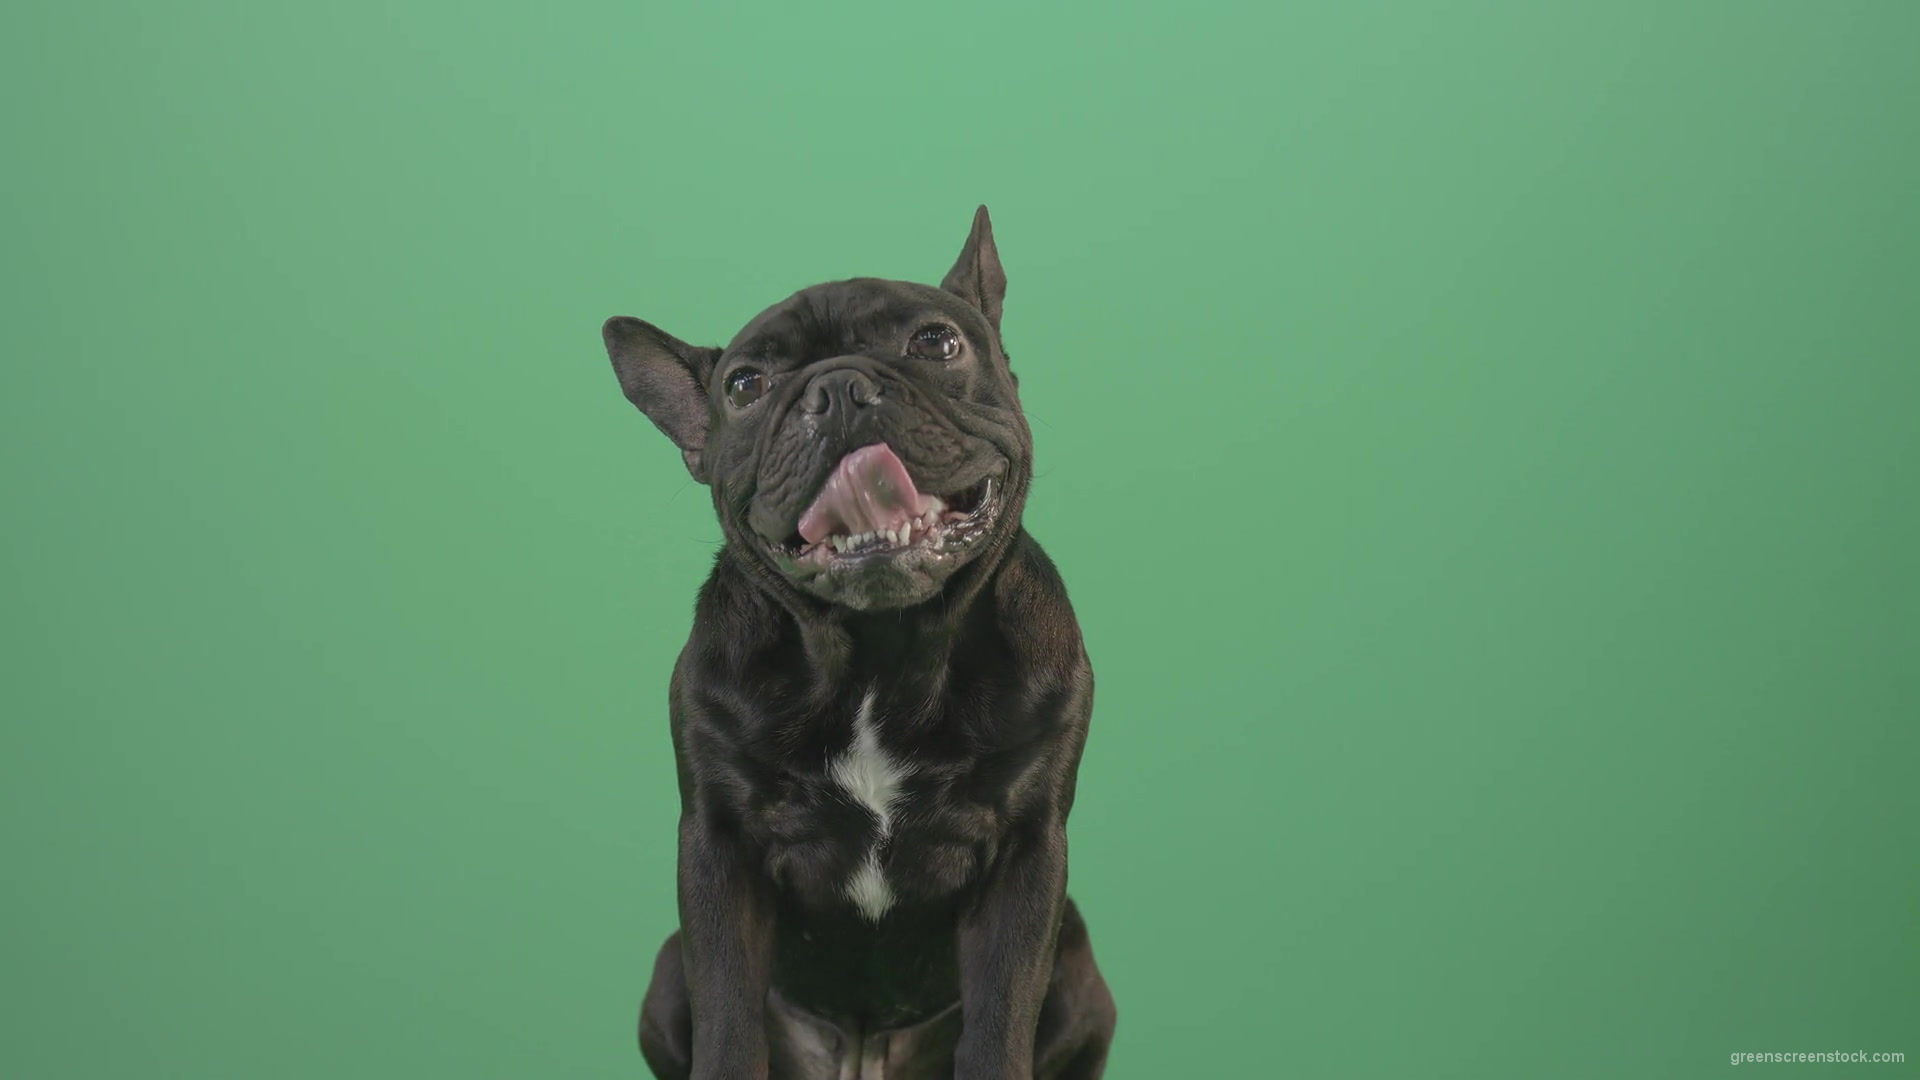 Hard-breathing-french-black-bull-dog-over-green-screen-4K-Video-Footage-1920_008 Green Screen Stock